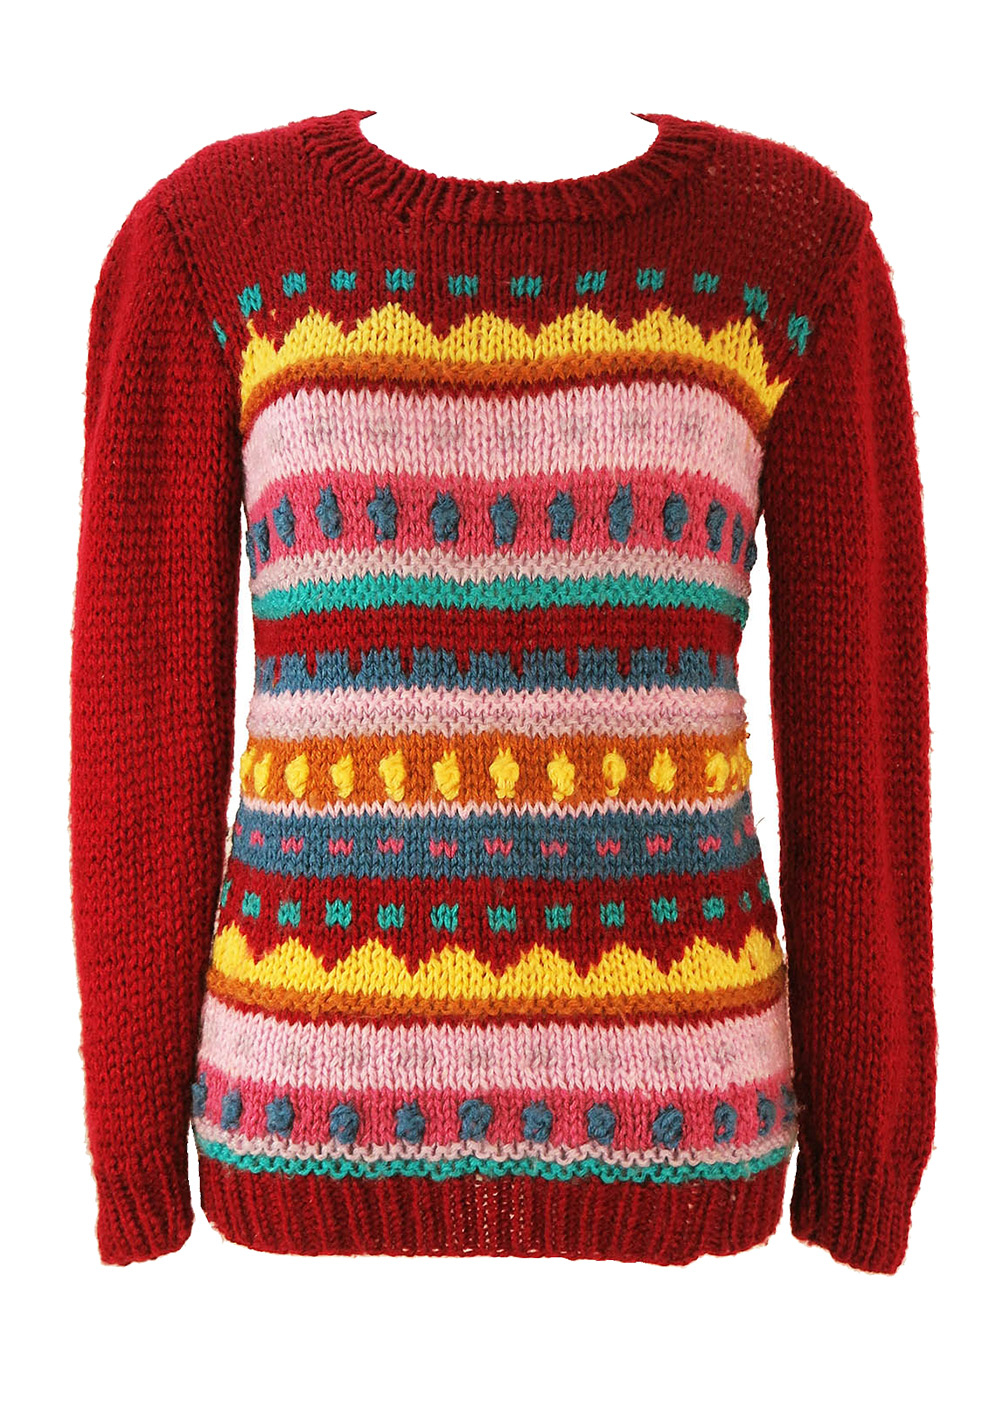 Knit Jumper Pattern Burgundy Knit Jumper With Multi Colour Striped Pattern S Reign